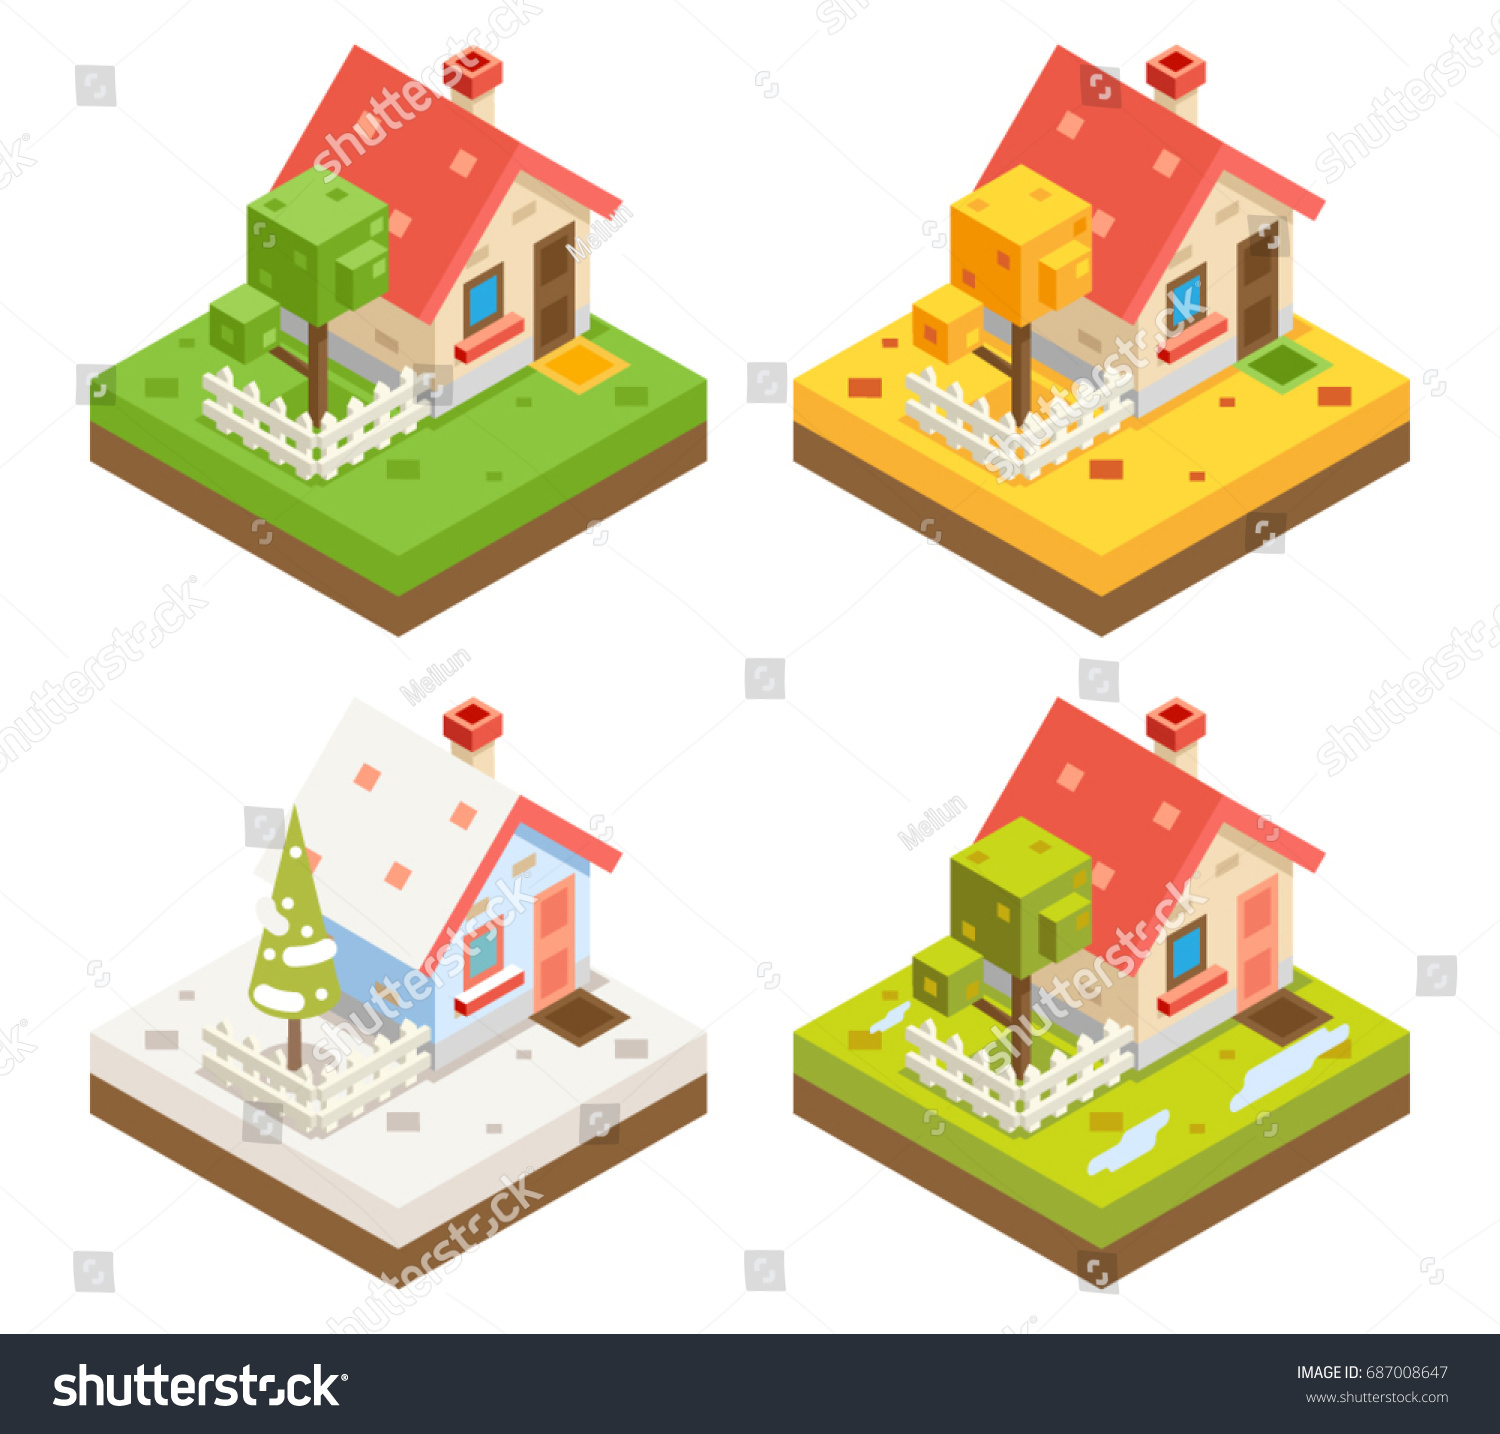 Isometric House 3d Icon Estate Real Stock Photo (Photo, Vector ...